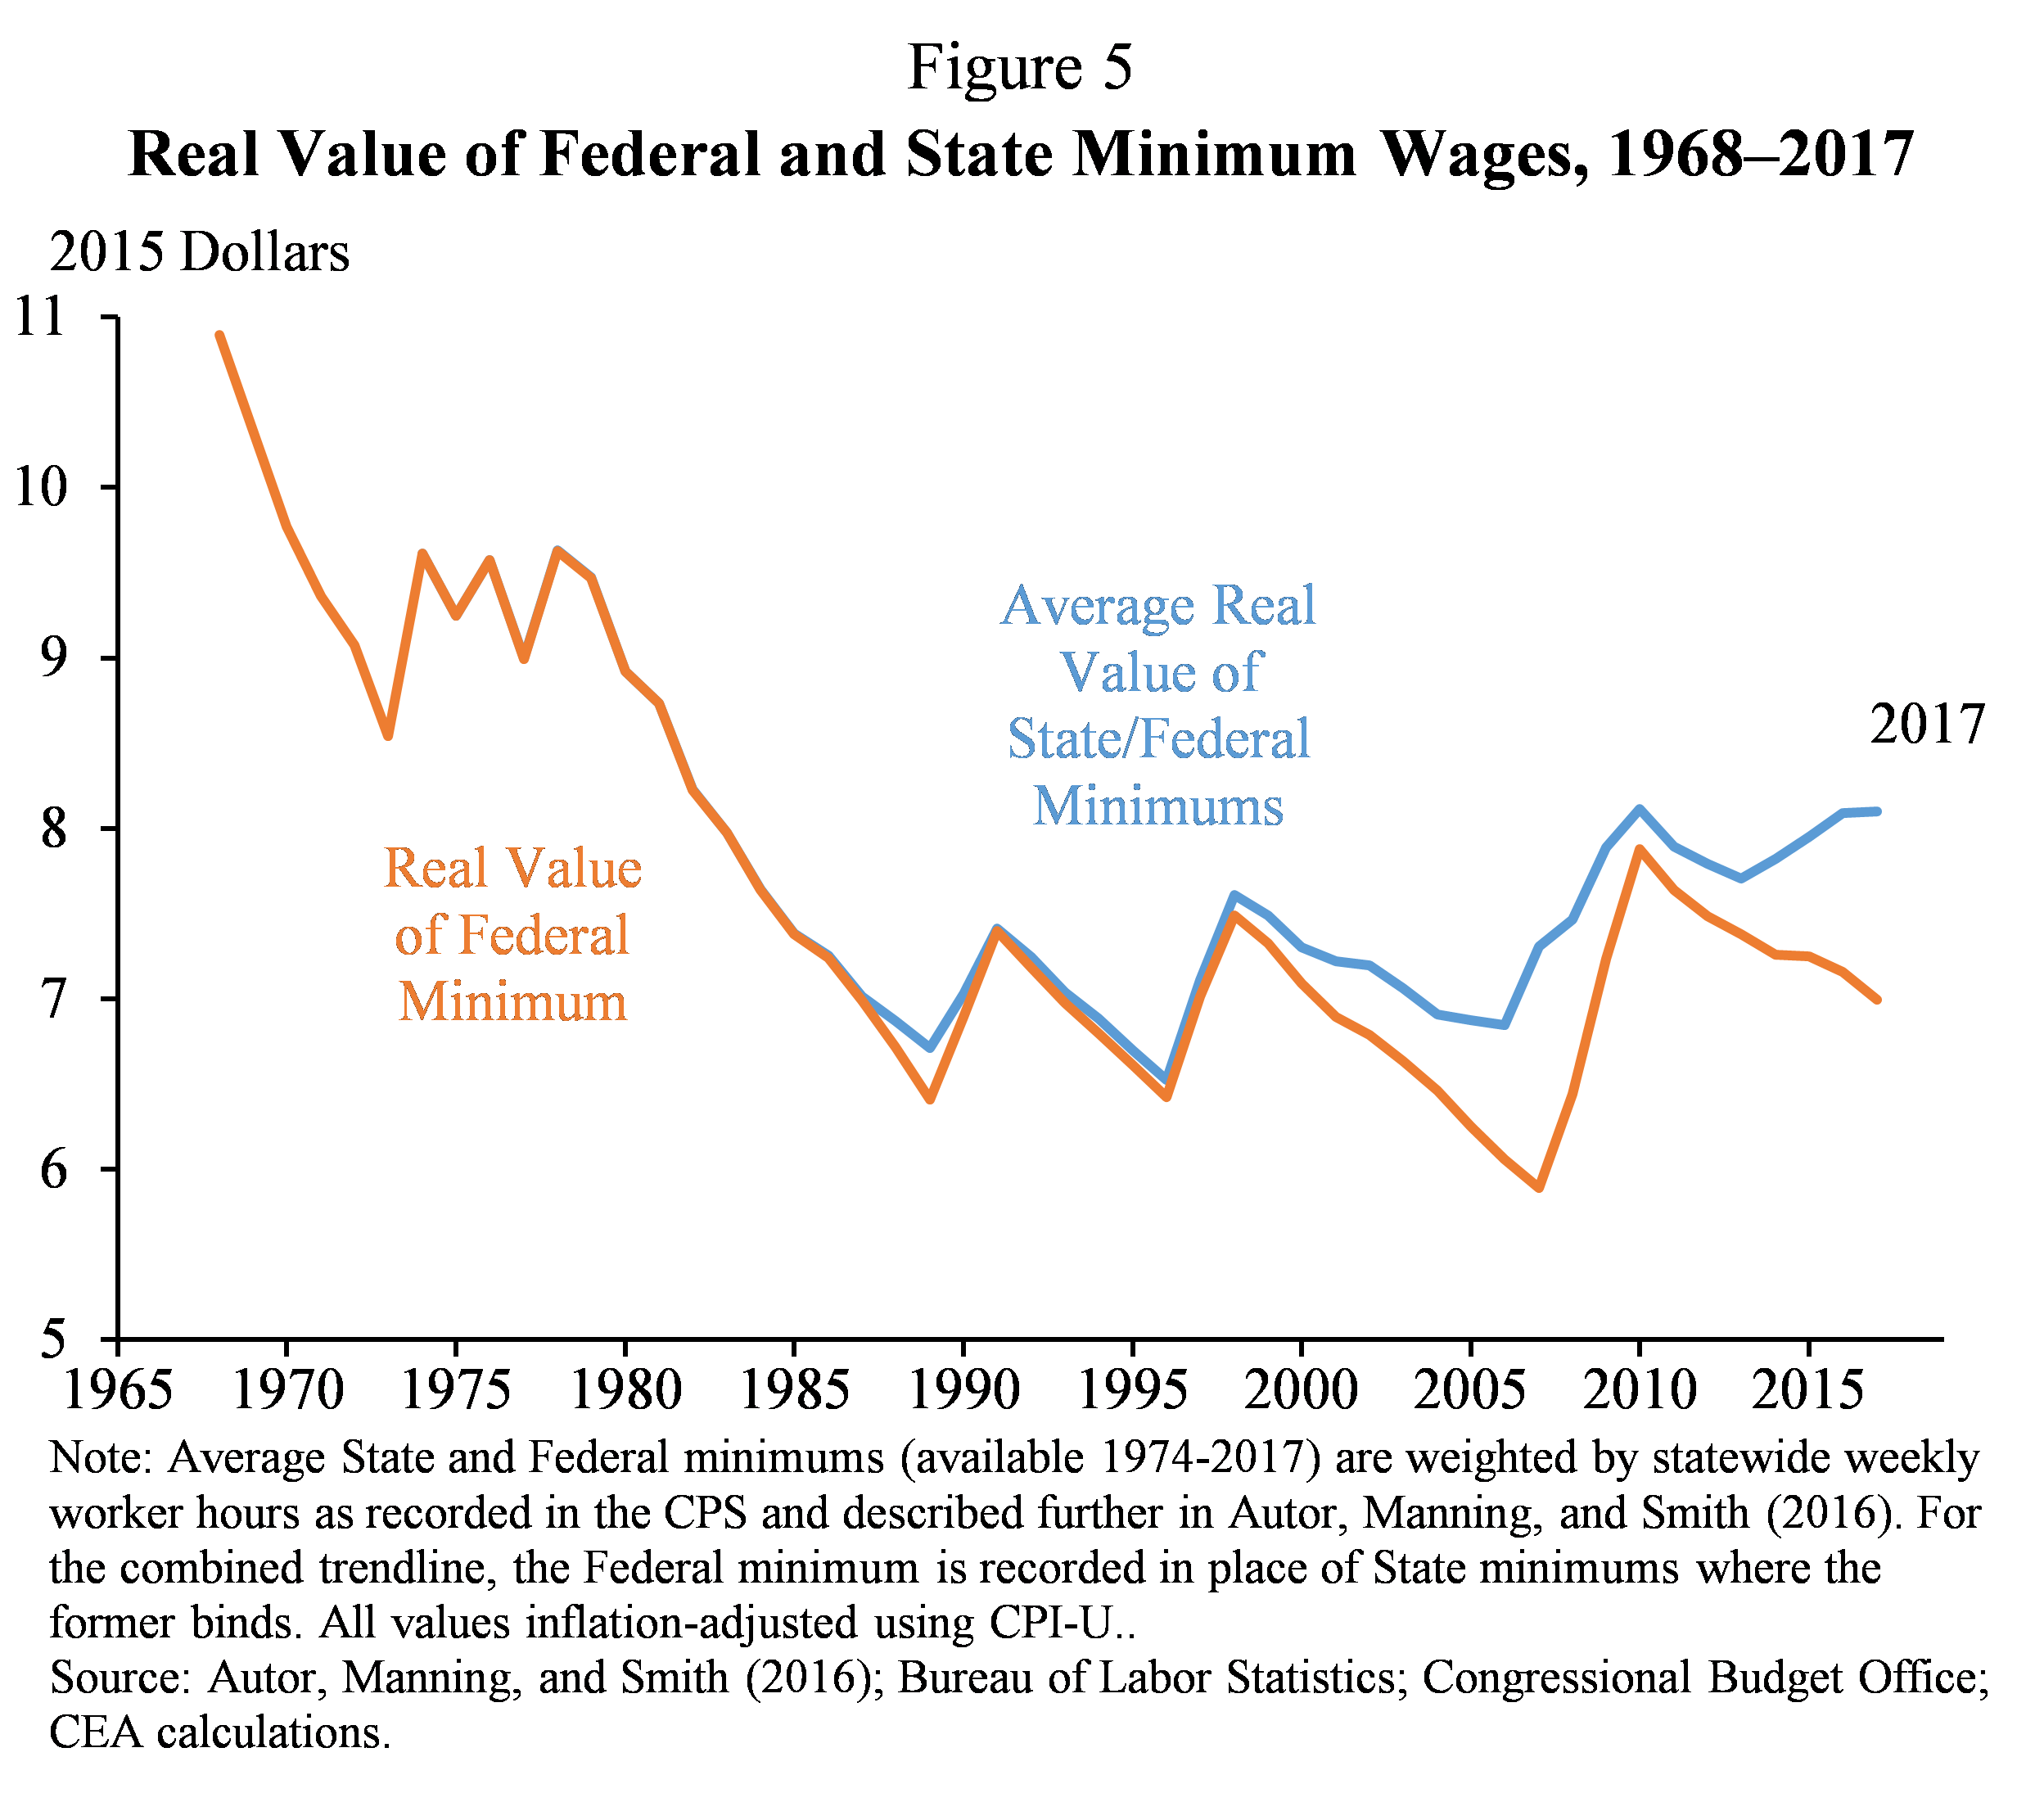 Figure 5.  Real Value of Federal and State Minimum Wages, 1968-2017